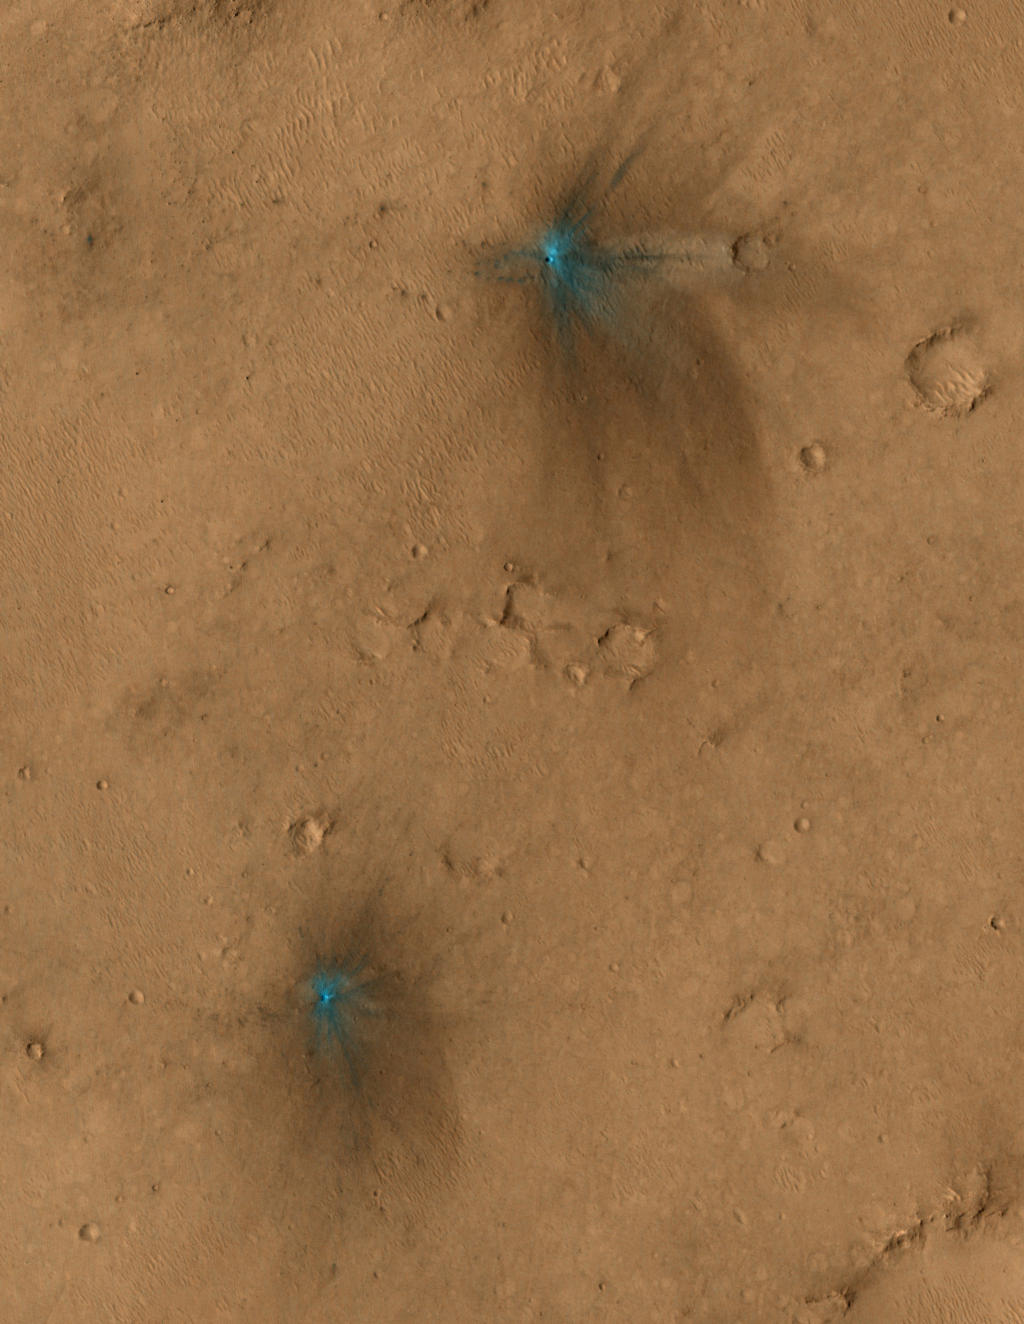 These images from the NASA Mars Reconnaissance Orbiter show several impact scars on Mars made by pieces of the NASA Mars Science Laboratory spacecraft that the spacecraft shed just before entering the Martian atmosphere.